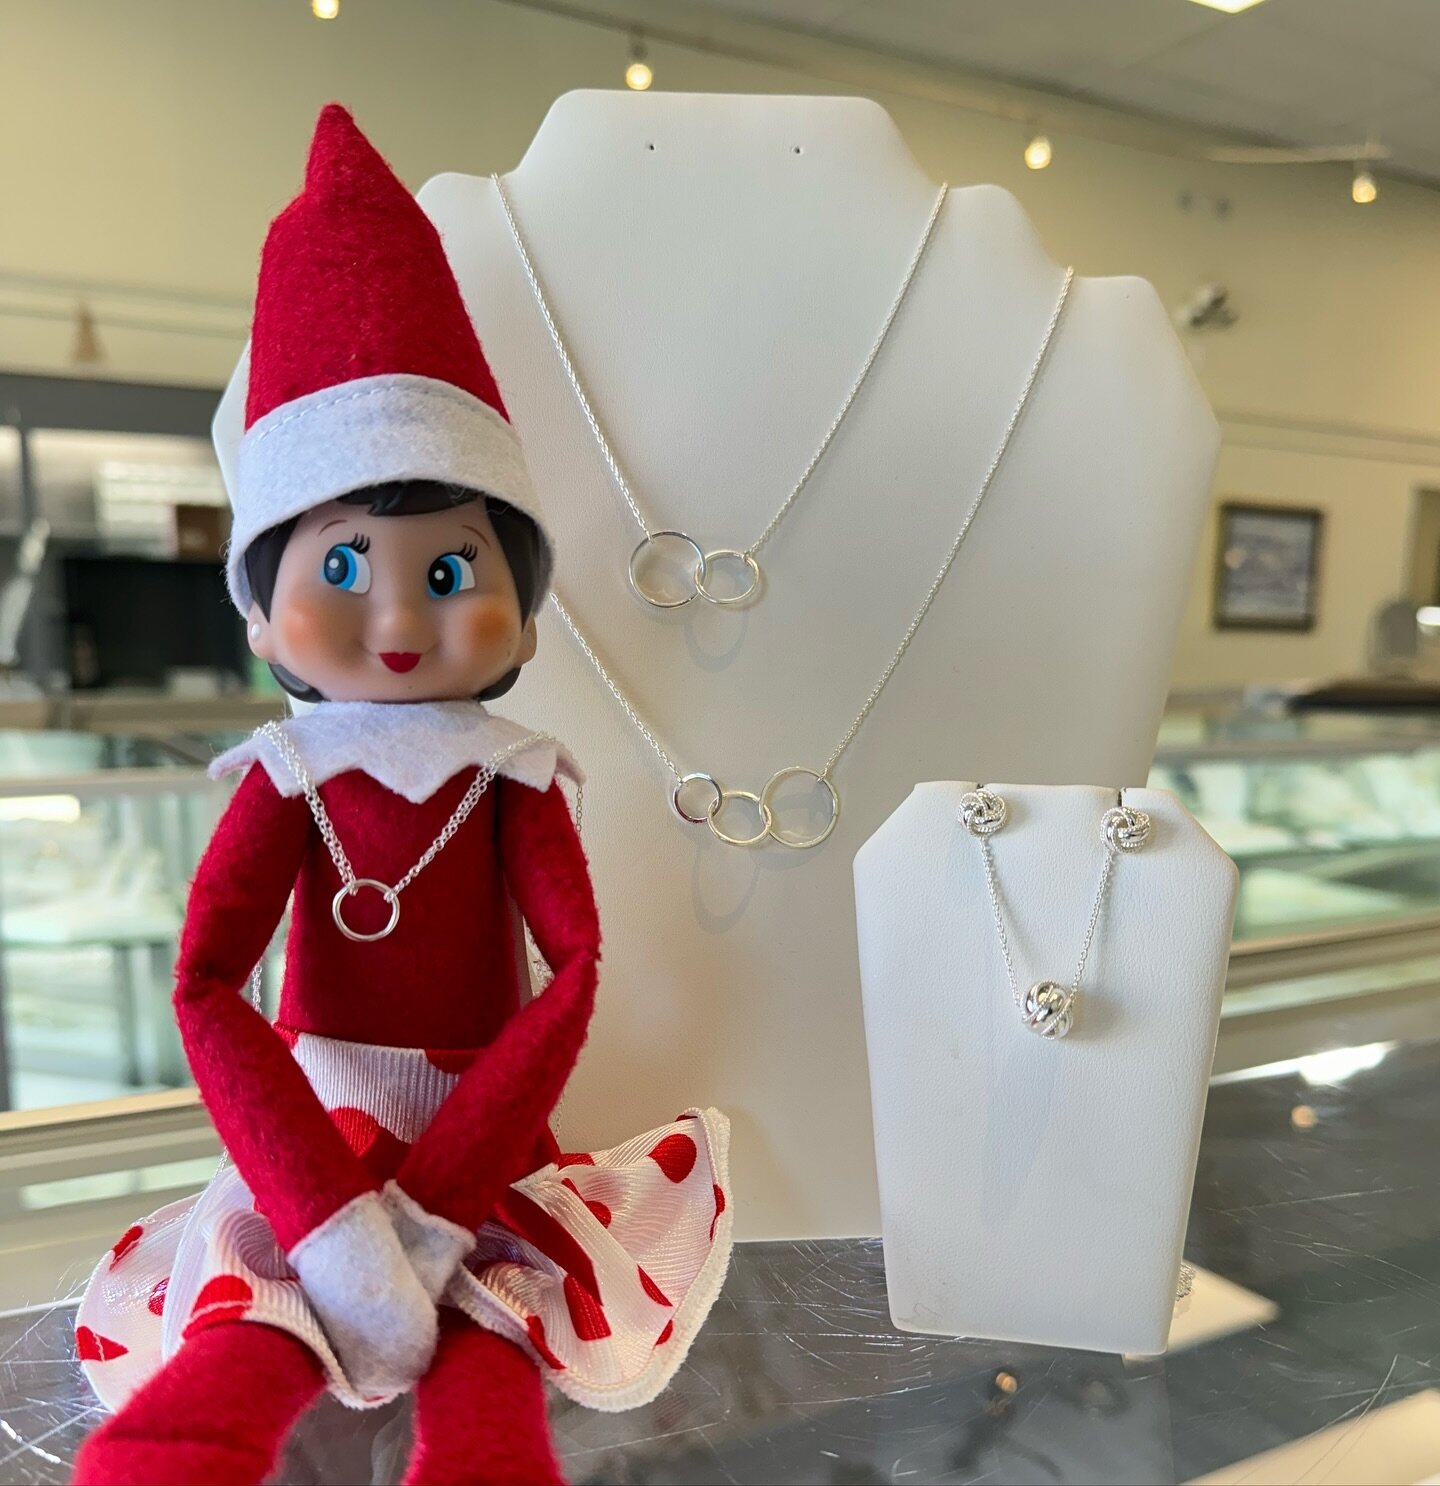 Sparkle found just a few of our simple silver necklaces and earrings that are the perfect gift or stocking stuffer! We are open today, tomorrow and Sunday to help with all your gift giving! #adventuresofsparkle #silvernecklace #silverjewelry 

#shops